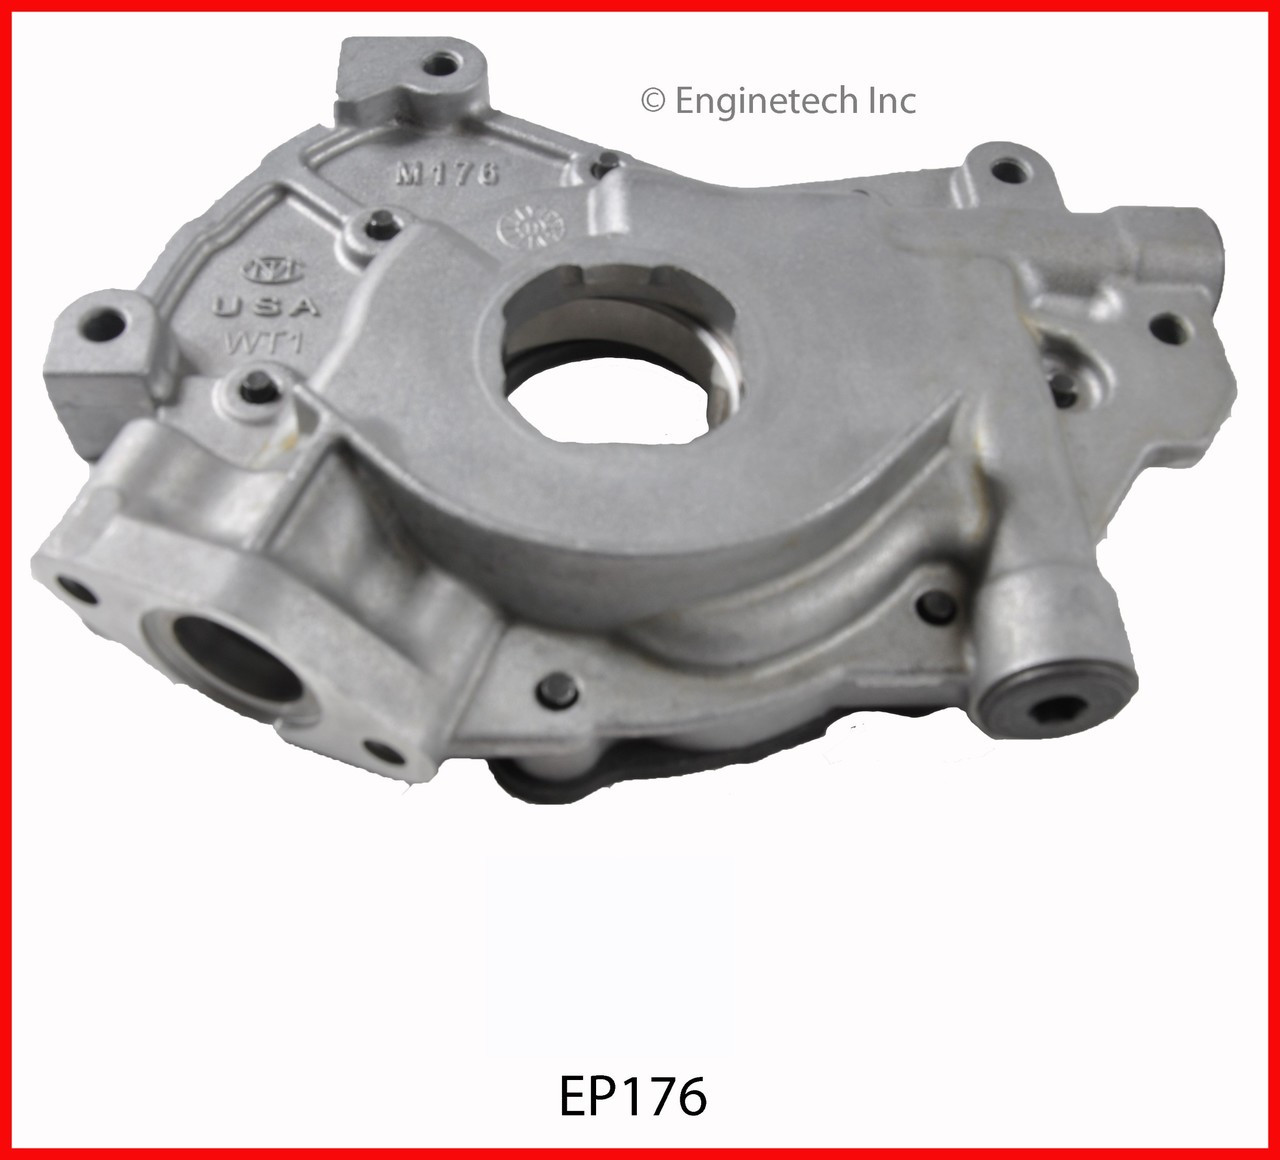 Oil Pump - 1998 Ford Expedition 5.4L (EP176.G68)